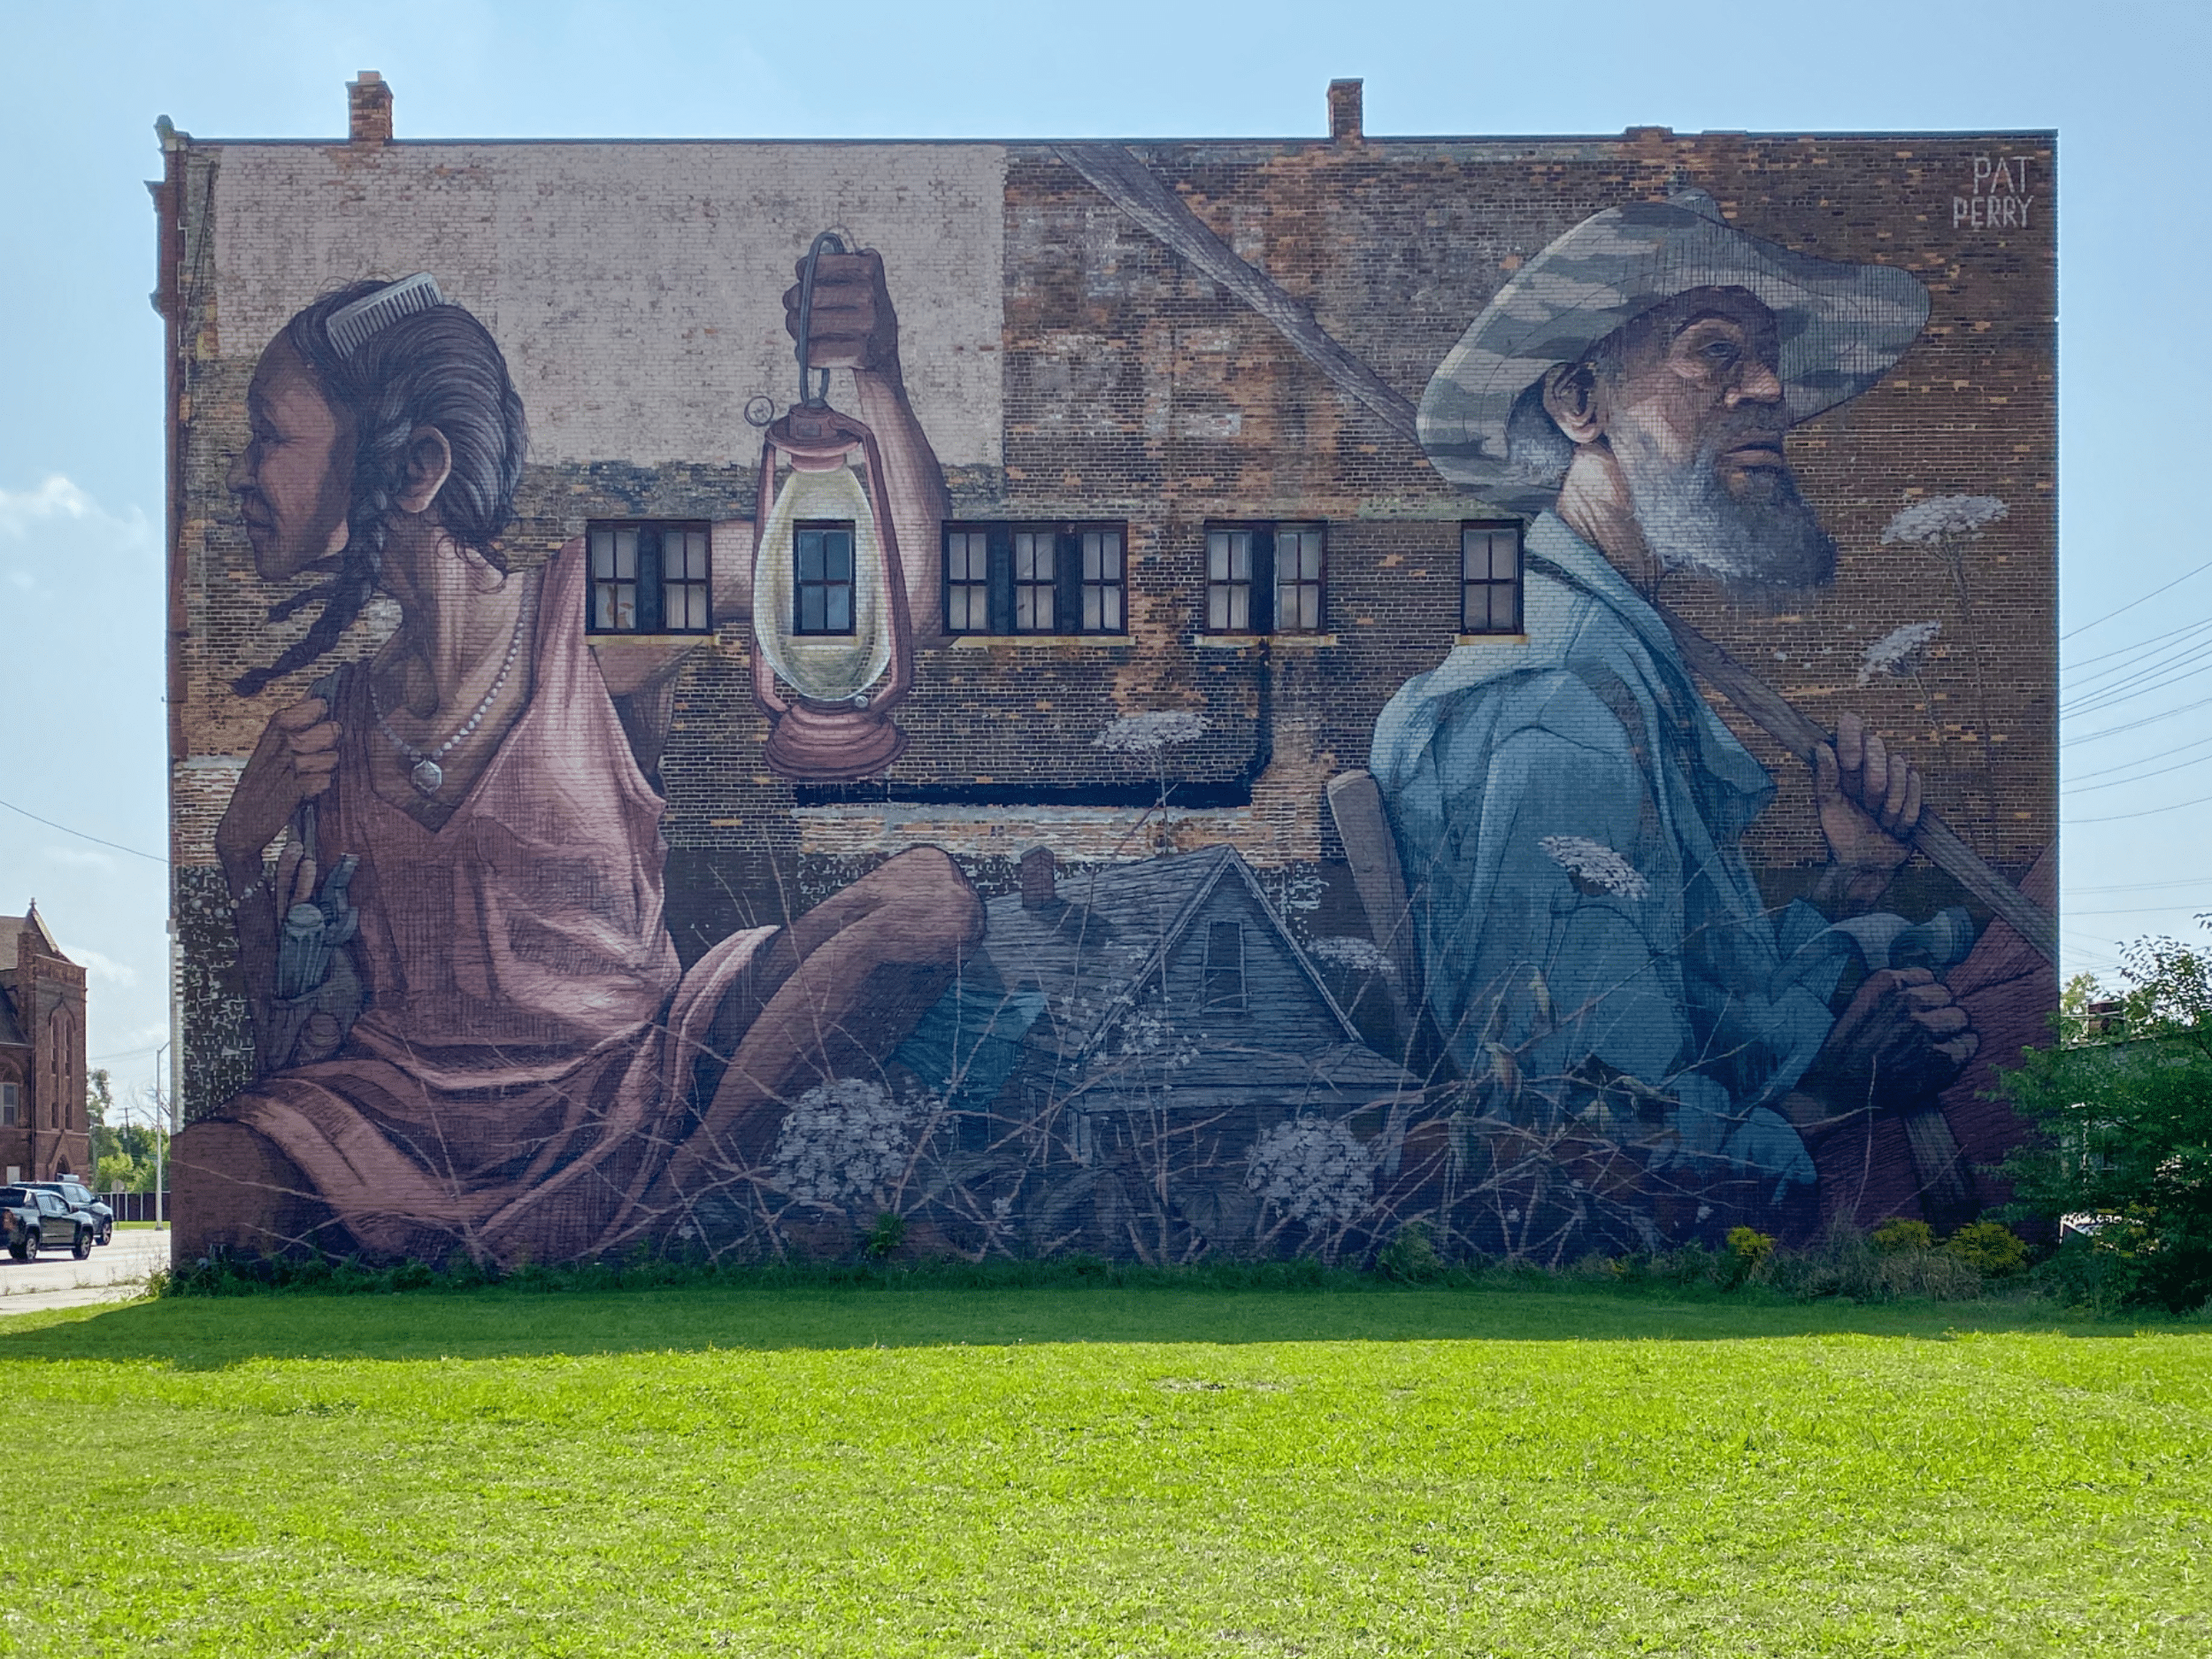 Photo mural on a wall with a young woman holding a lantern and an older man holding a shovel